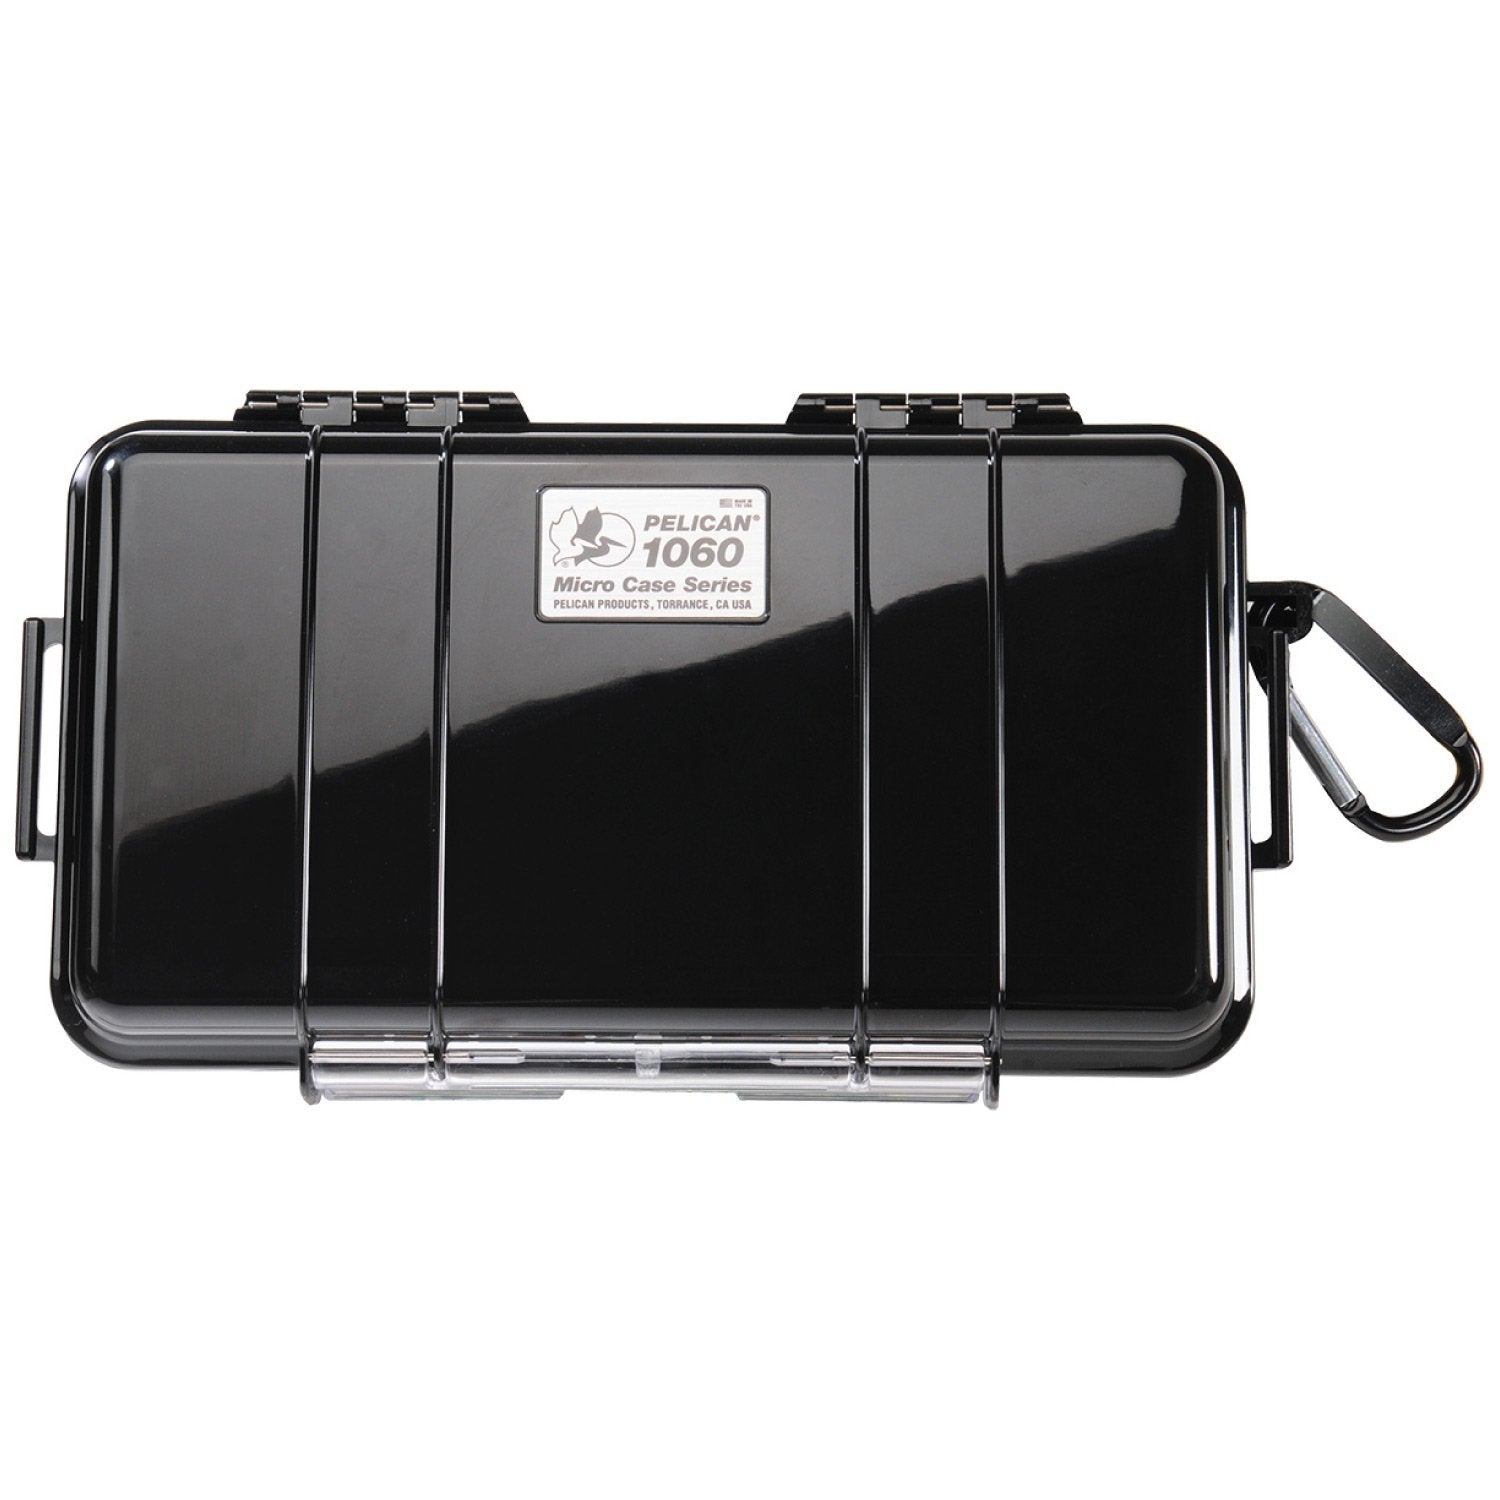 Pelican 1060 Micro Case Cases Pelican Products Black Shell with Black Liner Tactical Gear Supplier Tactical Distributors Australia